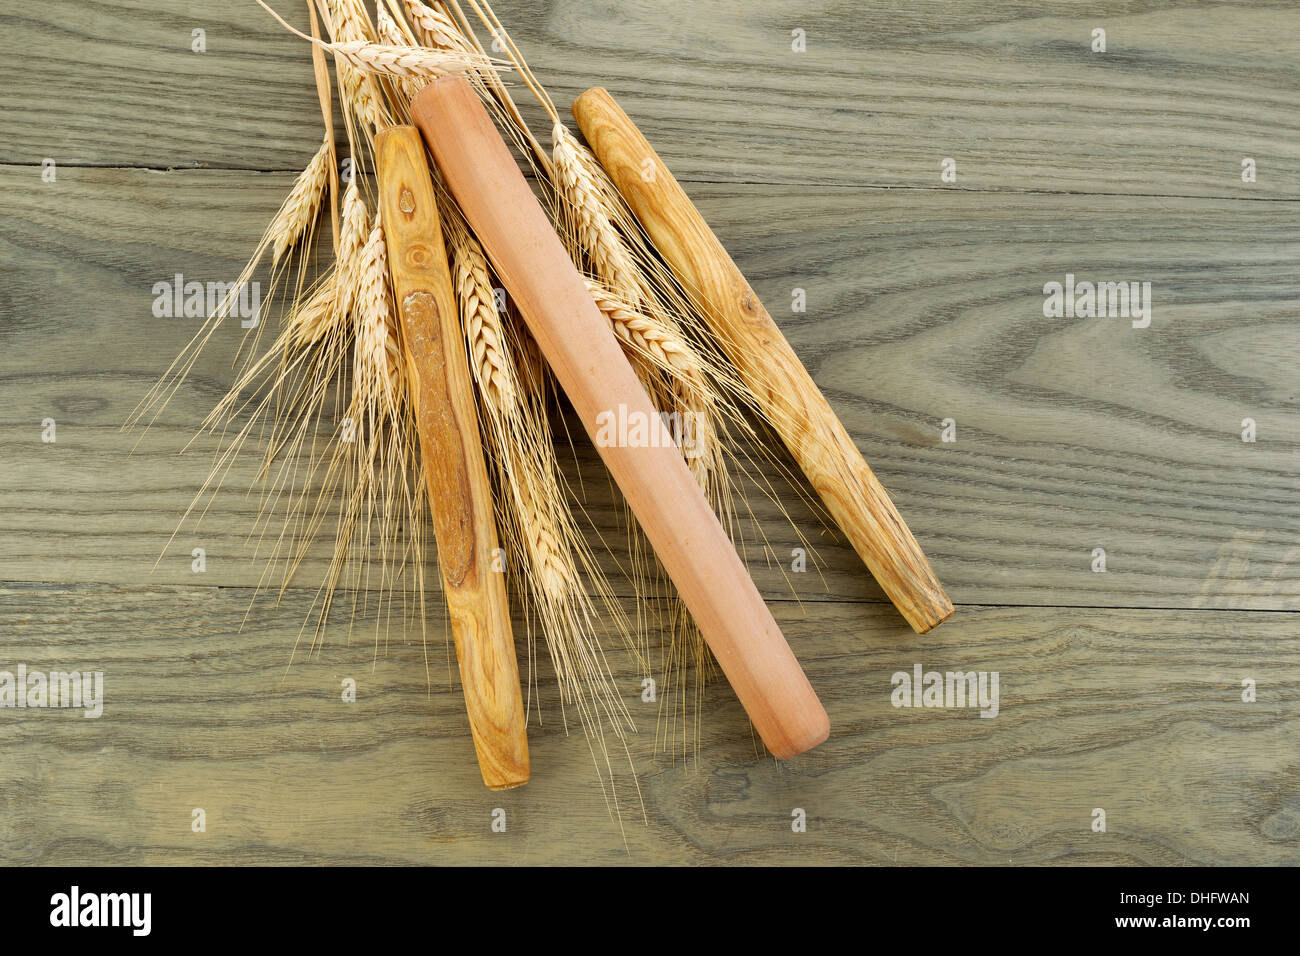 Horizontal photo of three wooden bread rollers on aged white ash wood boards with dried wheat stalks Stock Photo